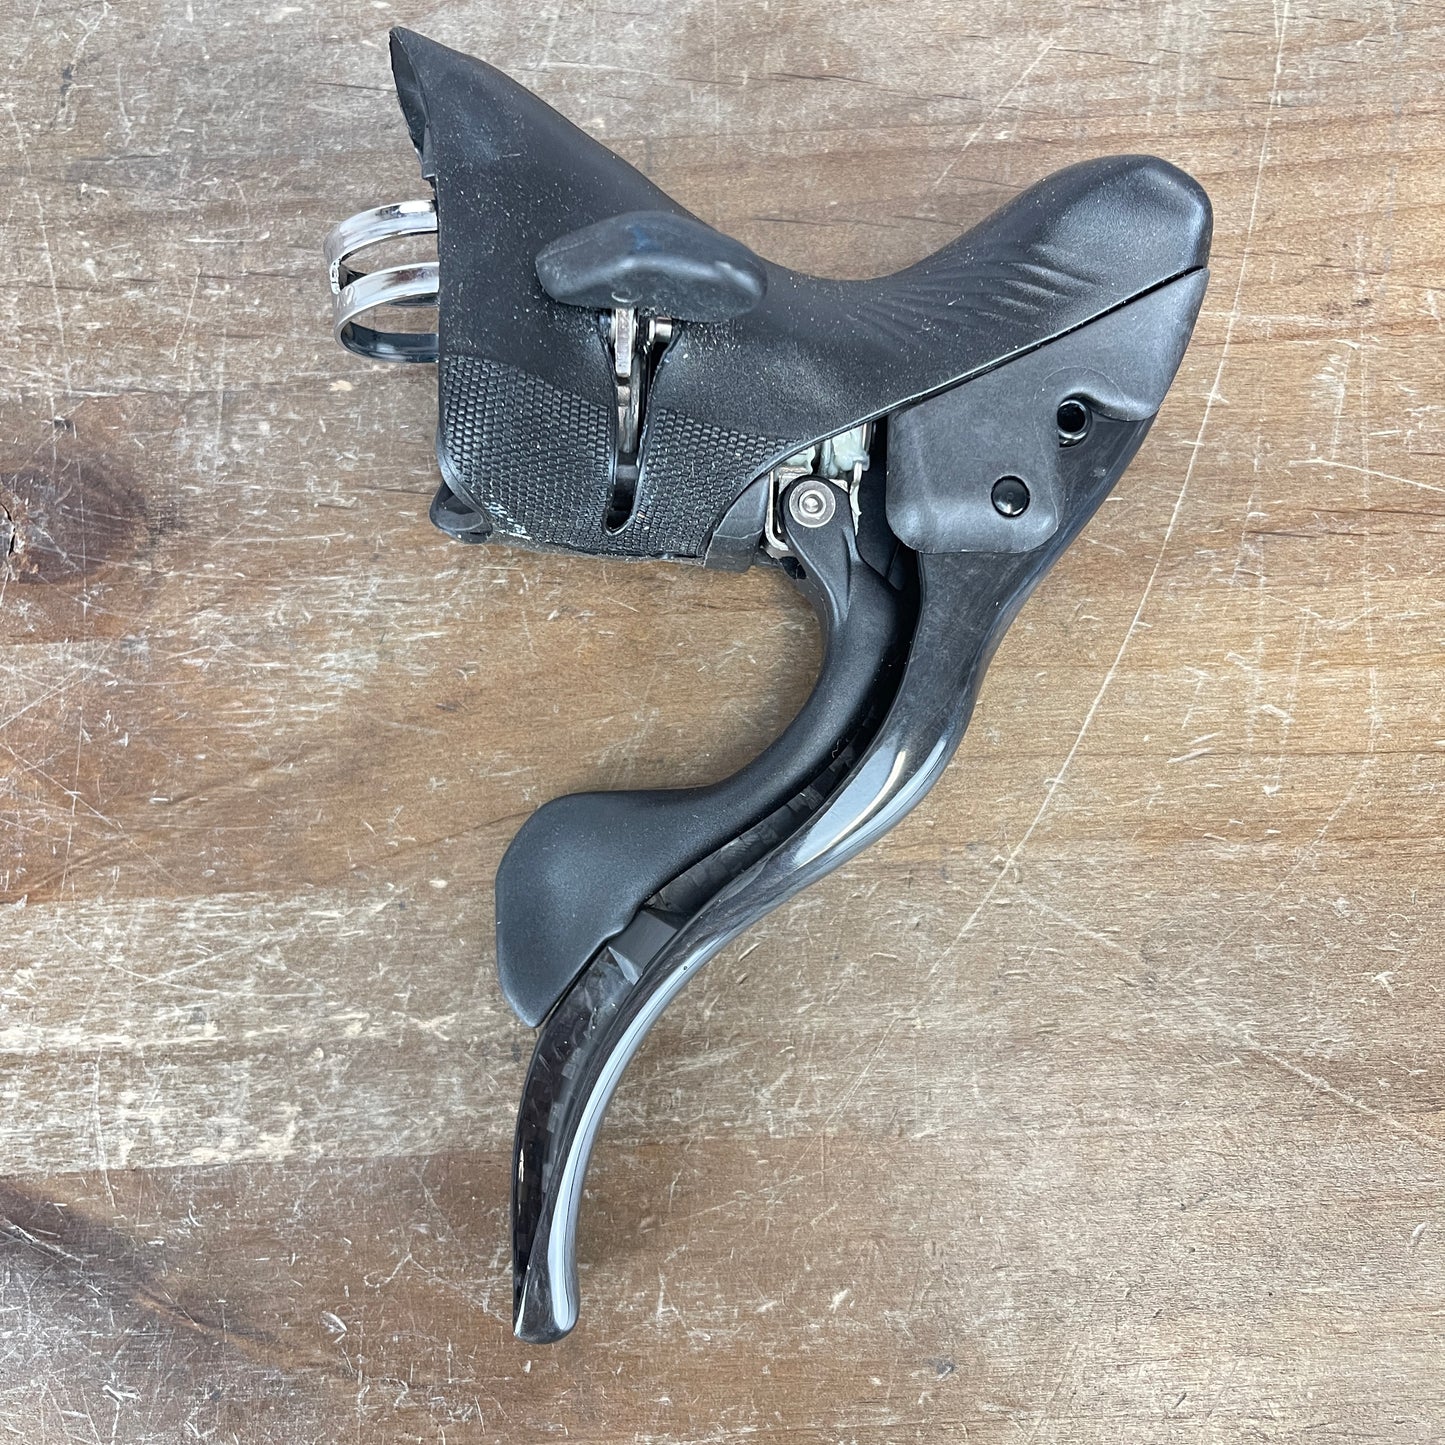 New! Campagnolo Record 12spd LEFT Side Only Road Bike Shifter 274g